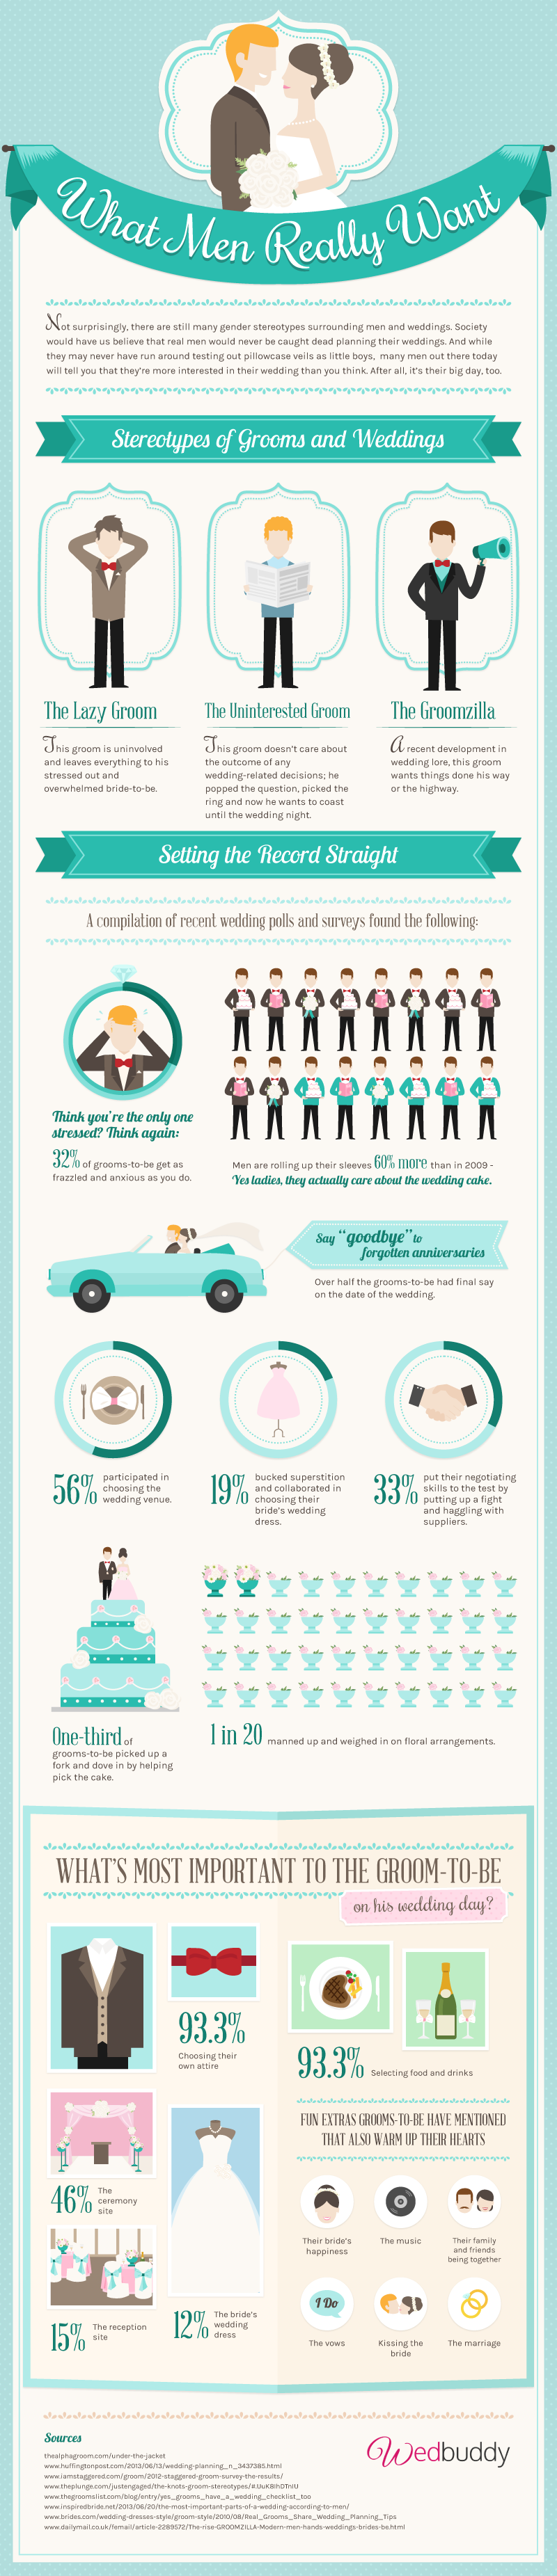 http://blog.wedbuddy.com/2014/02/21/infographic-what-men-really-want/